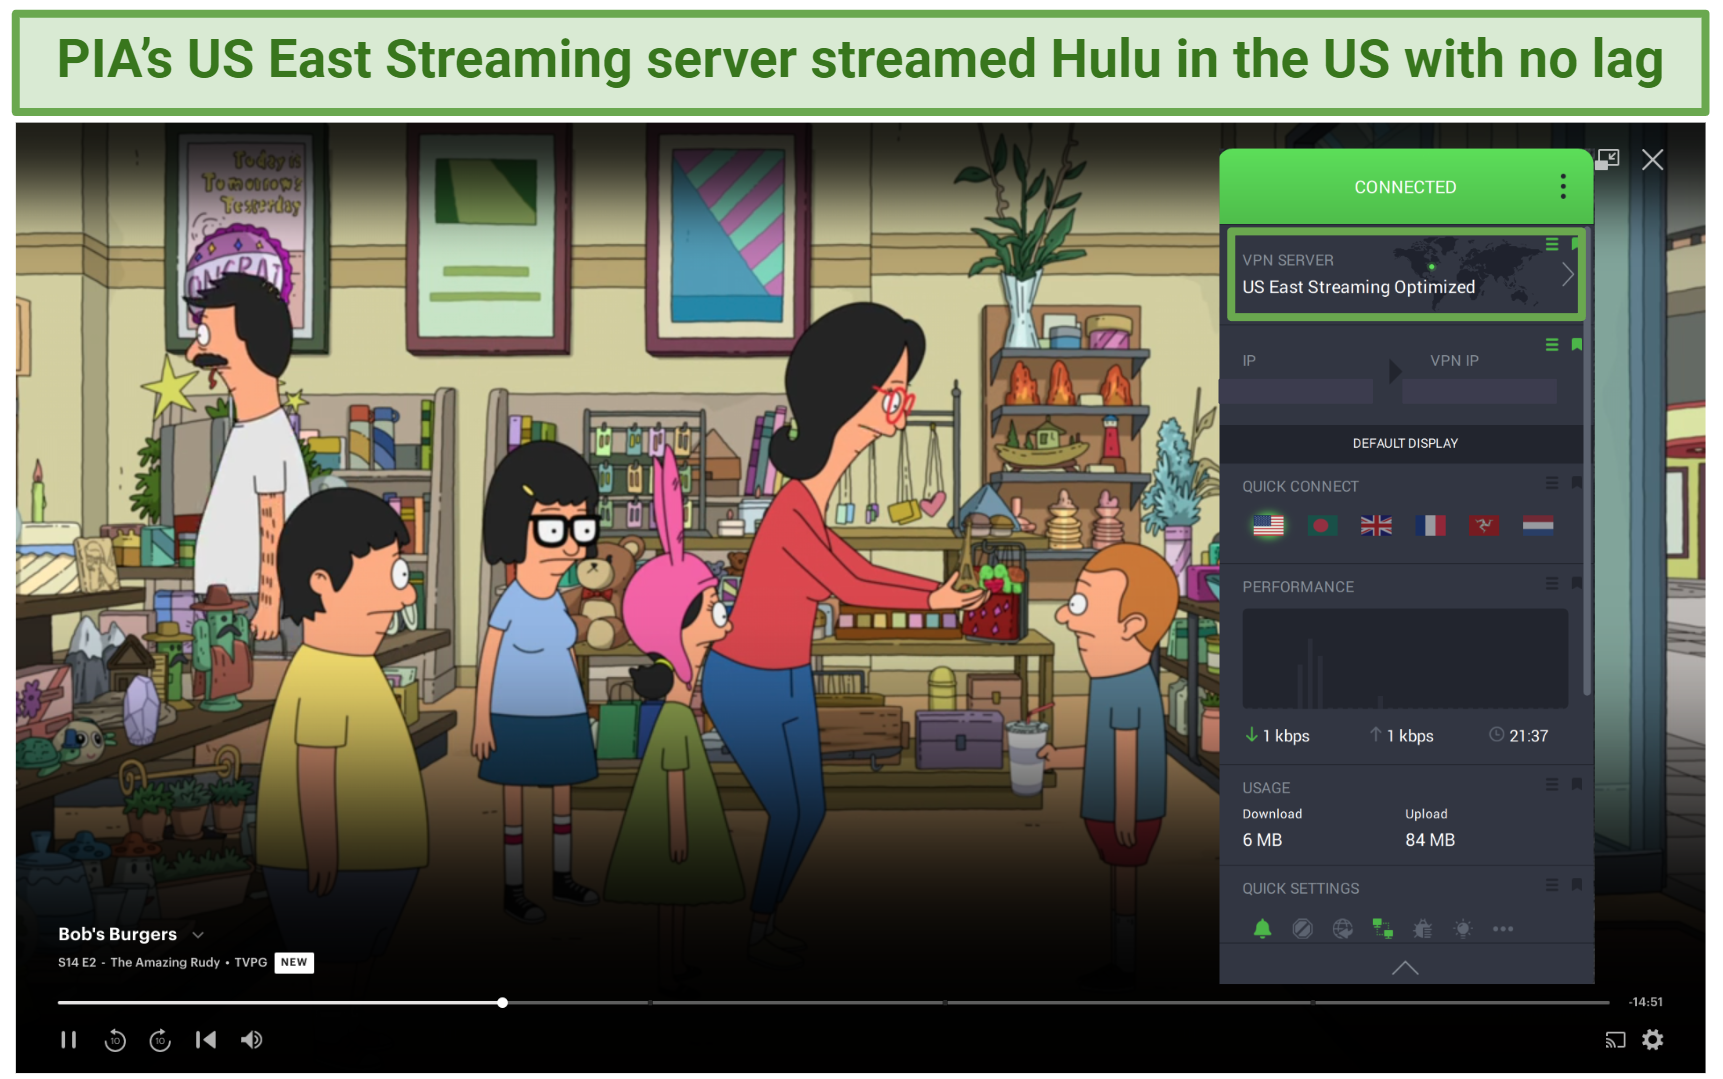 Streaming Hulu from the US while connected to PIA's US East Streaming server